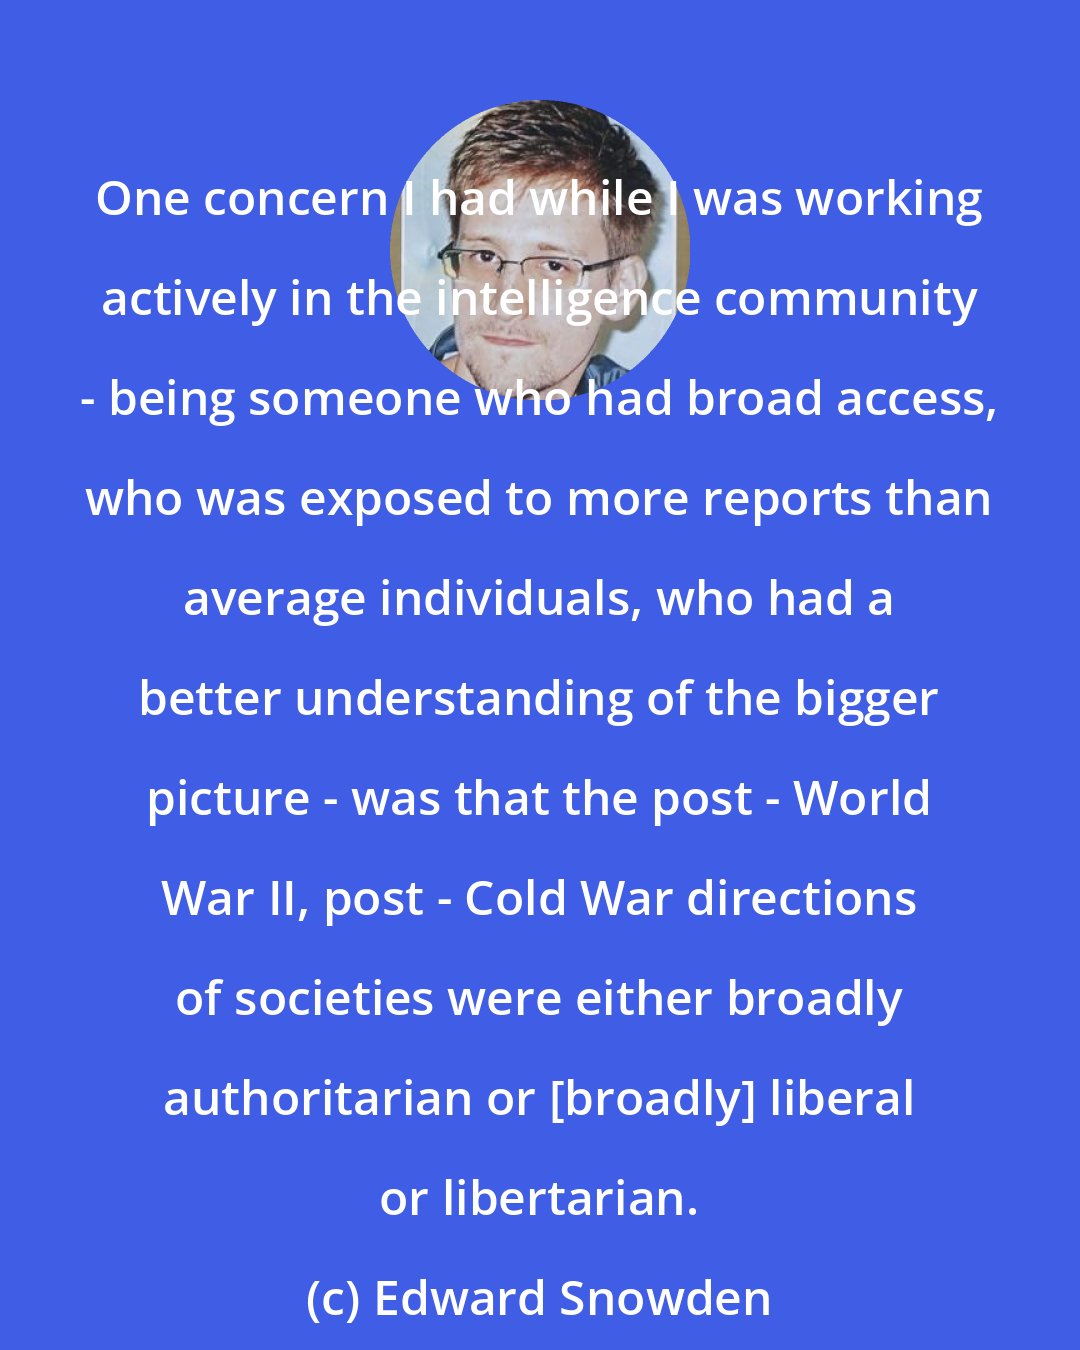 Edward Snowden: One concern I had while I was working actively in the intelligence community - being someone who had broad access, who was exposed to more reports than average individuals, who had a better understanding of the bigger picture - was that the post - World War II, post - Cold War directions of societies were either broadly authoritarian or [broadly] liberal or libertarian.